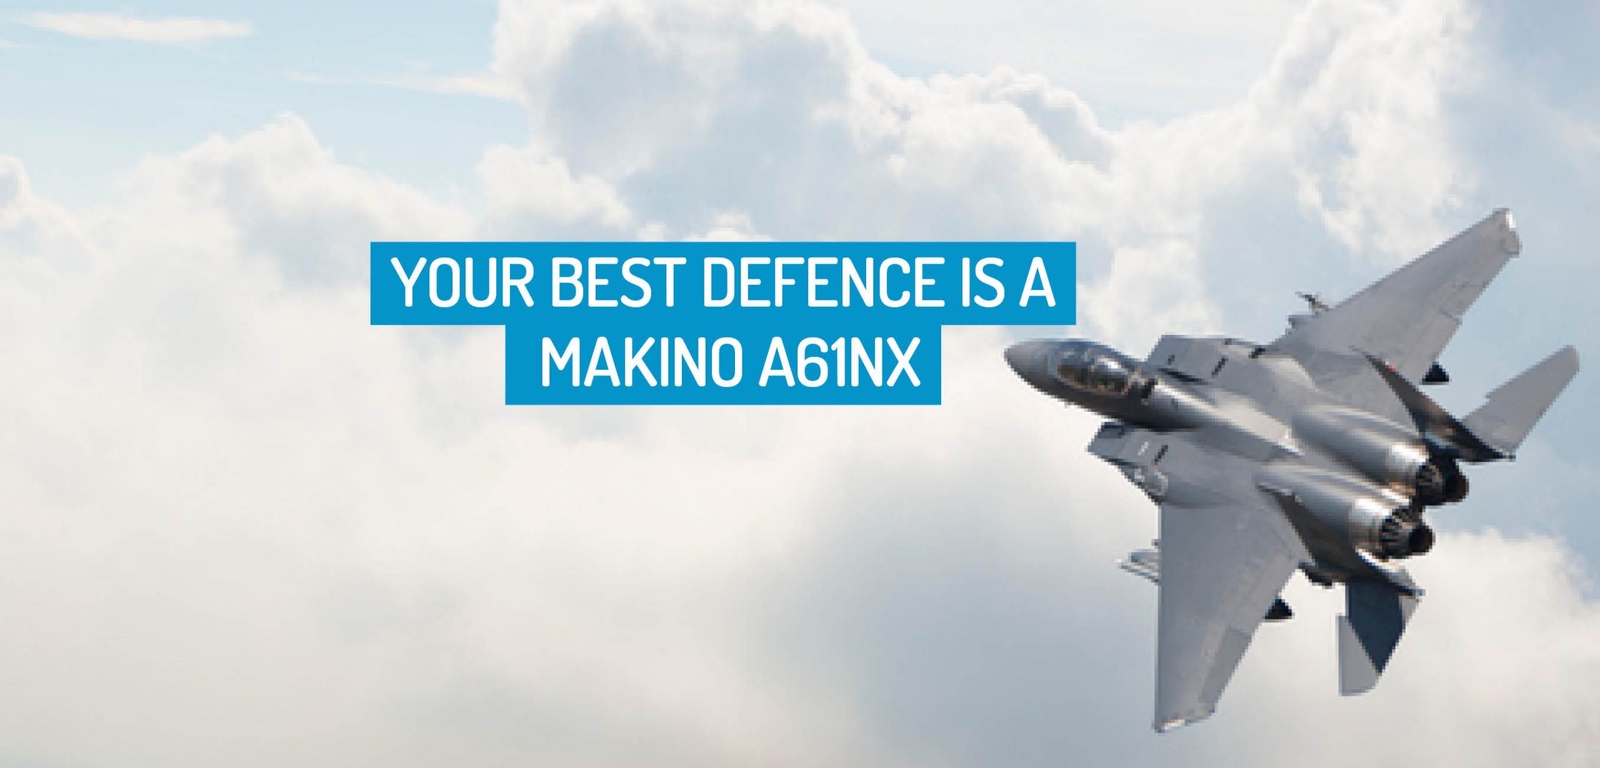 Your Best Defence is a Makino a61nx